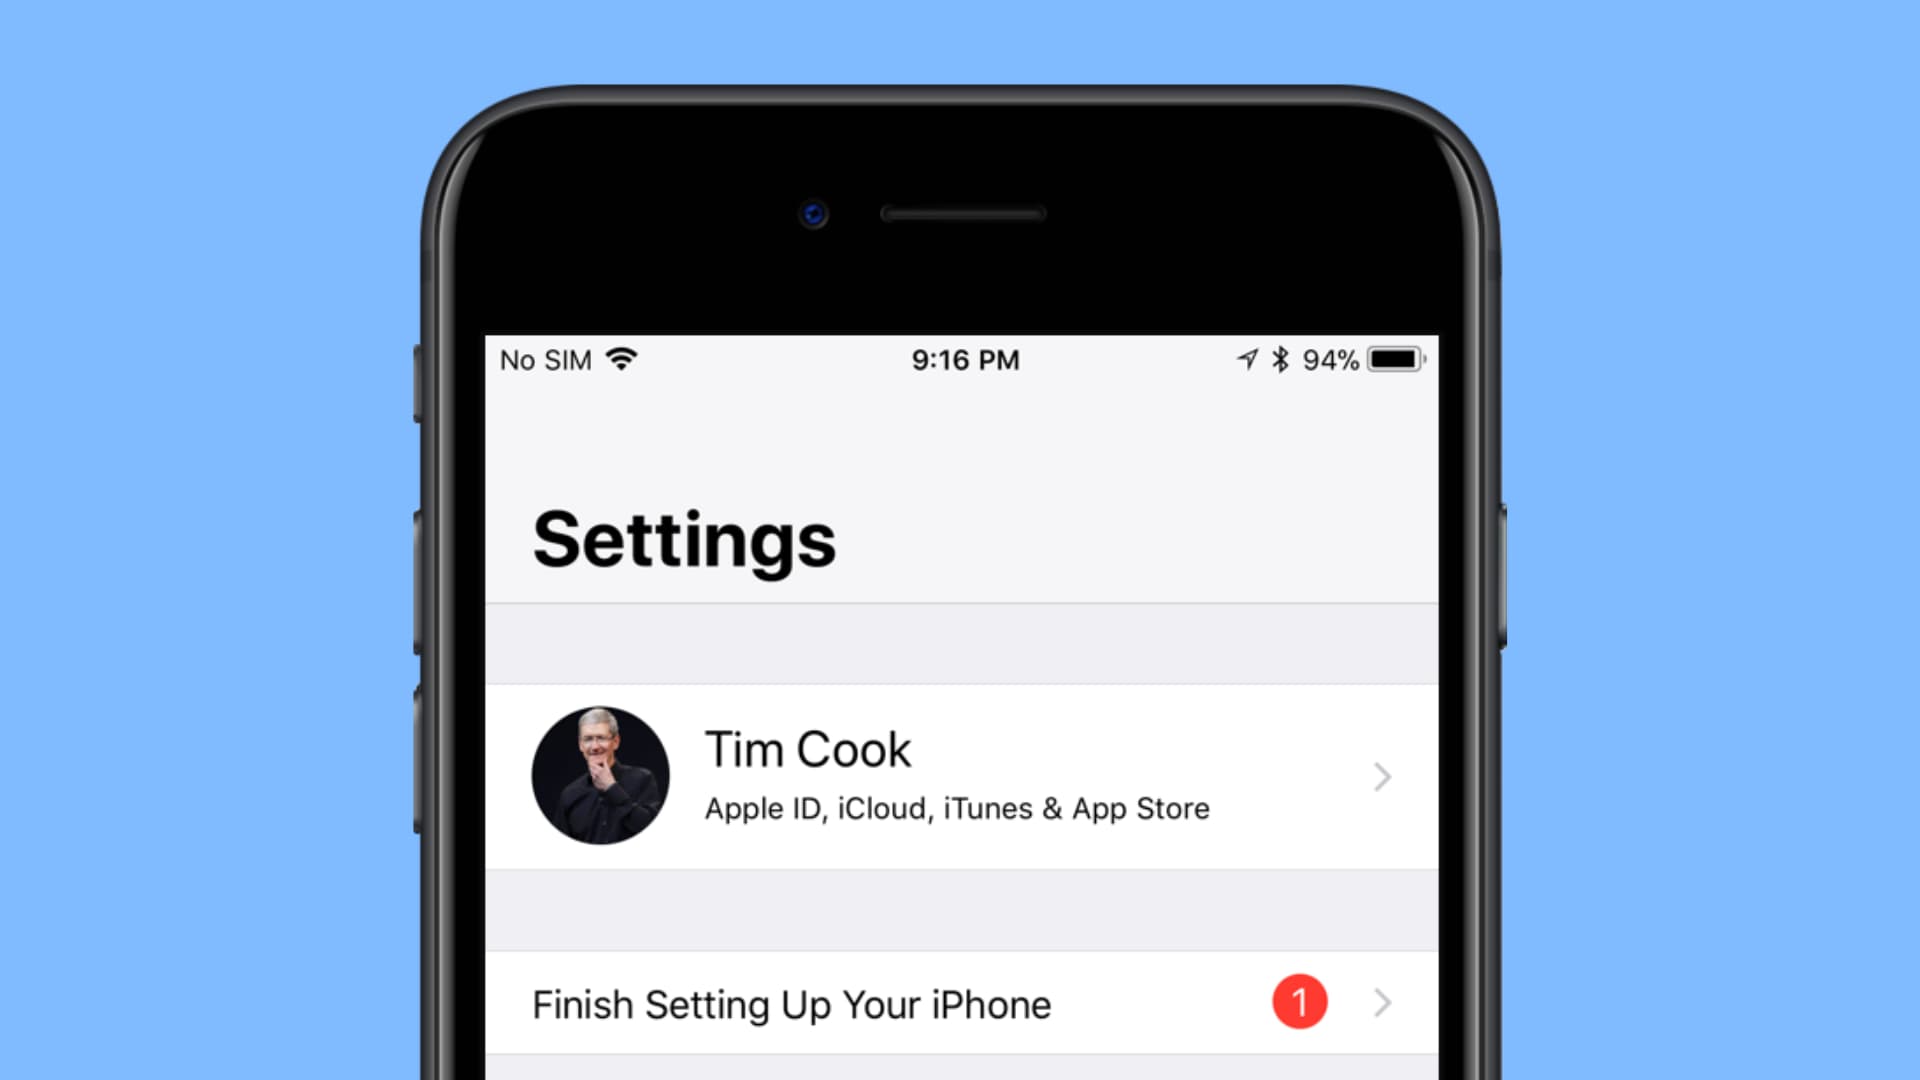 Finish Setting Up Your iPhone alert in Settings app